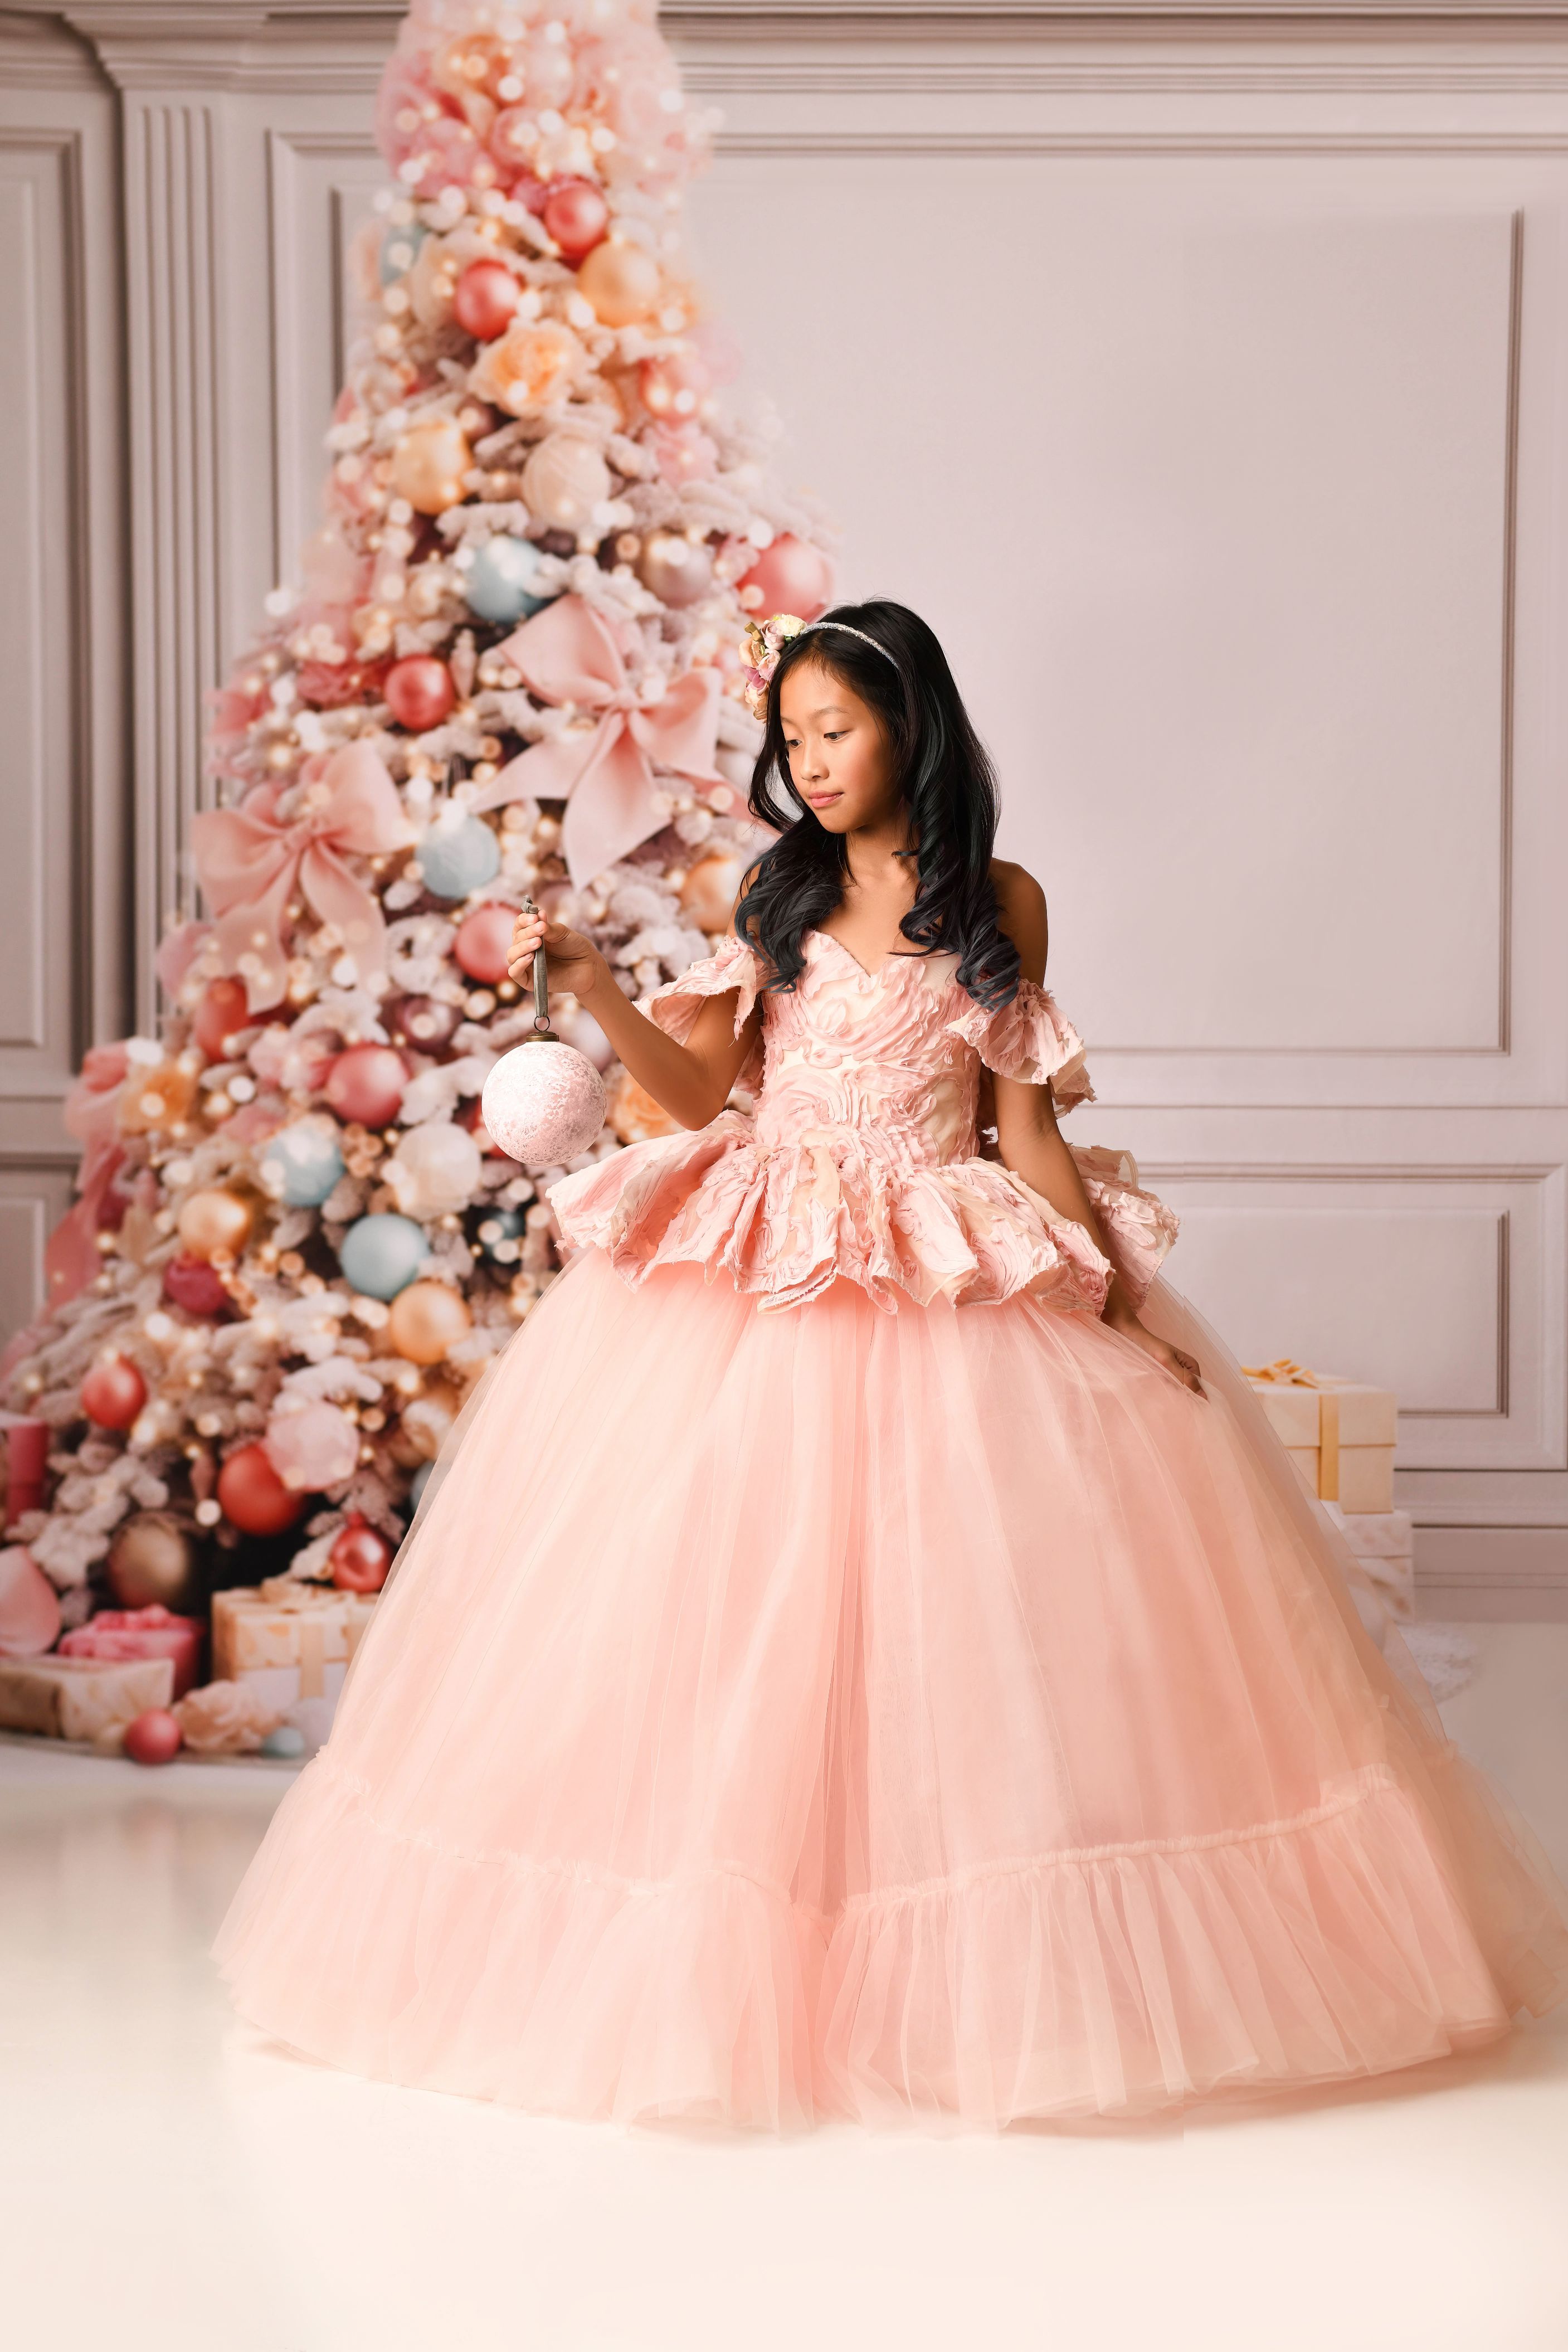 Girls Holiday Photography Gowns